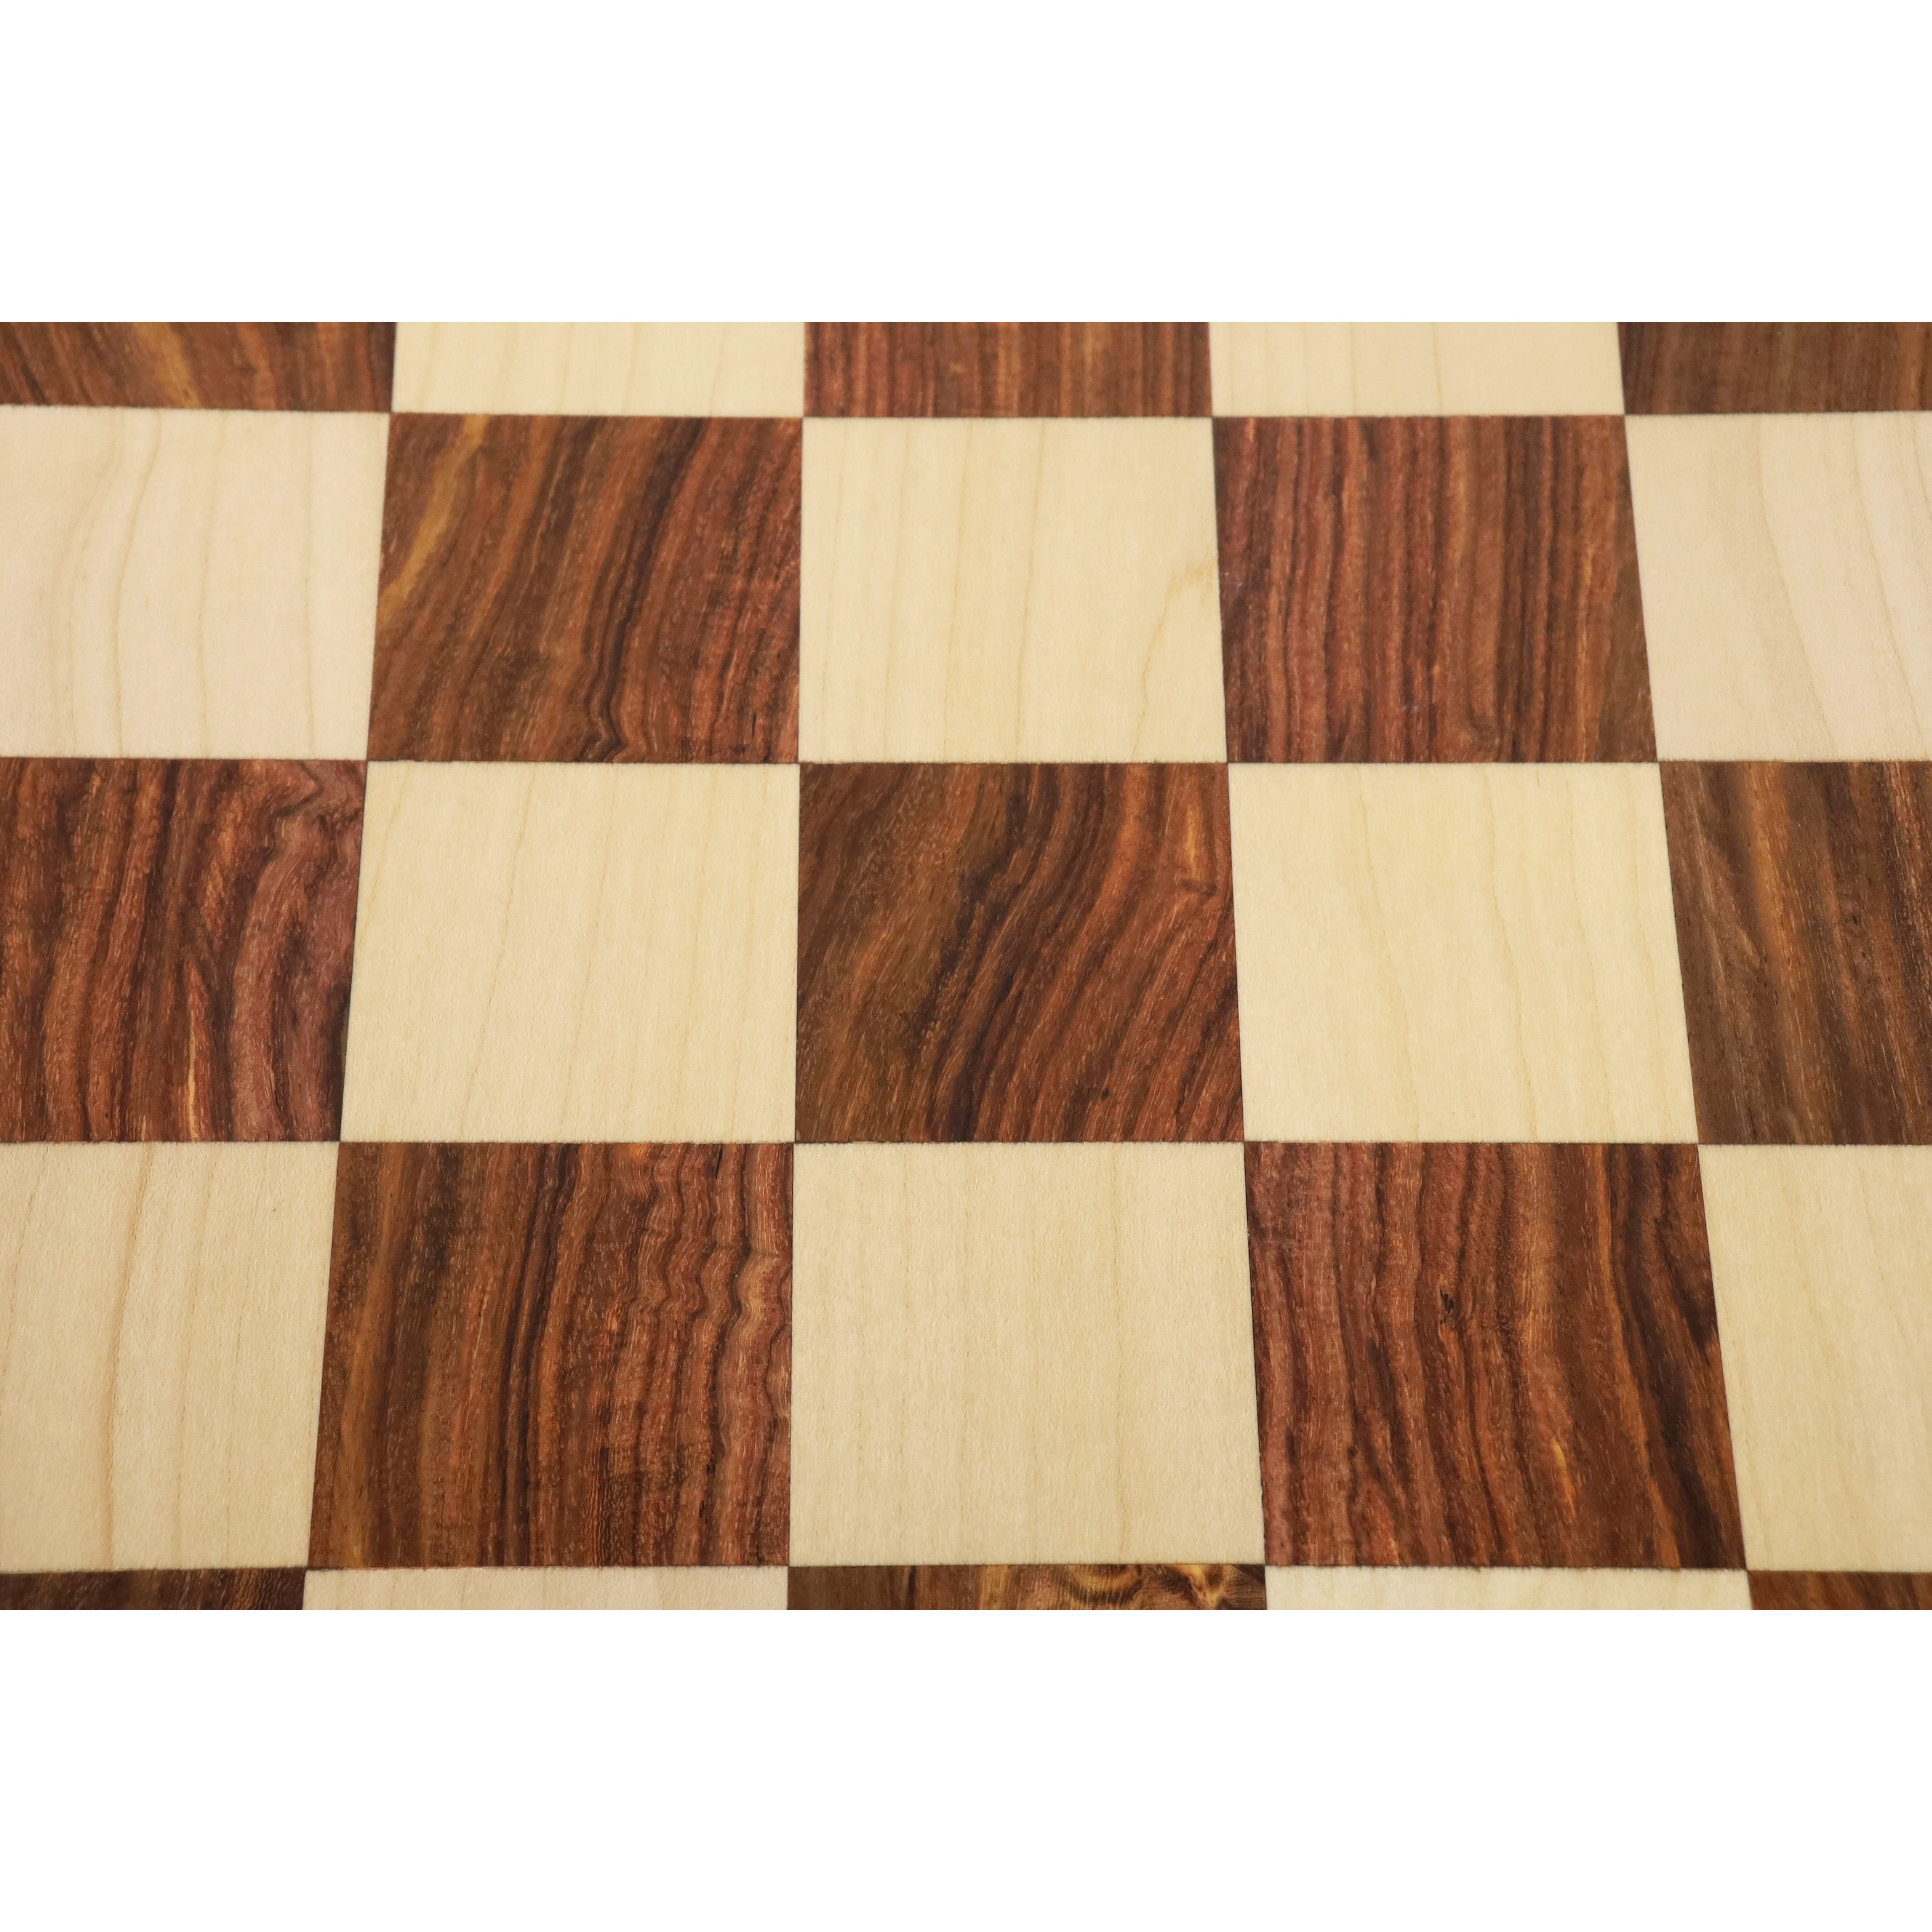 19" Golden Rosewood & Maple | Chessboard | Professional Chess Set